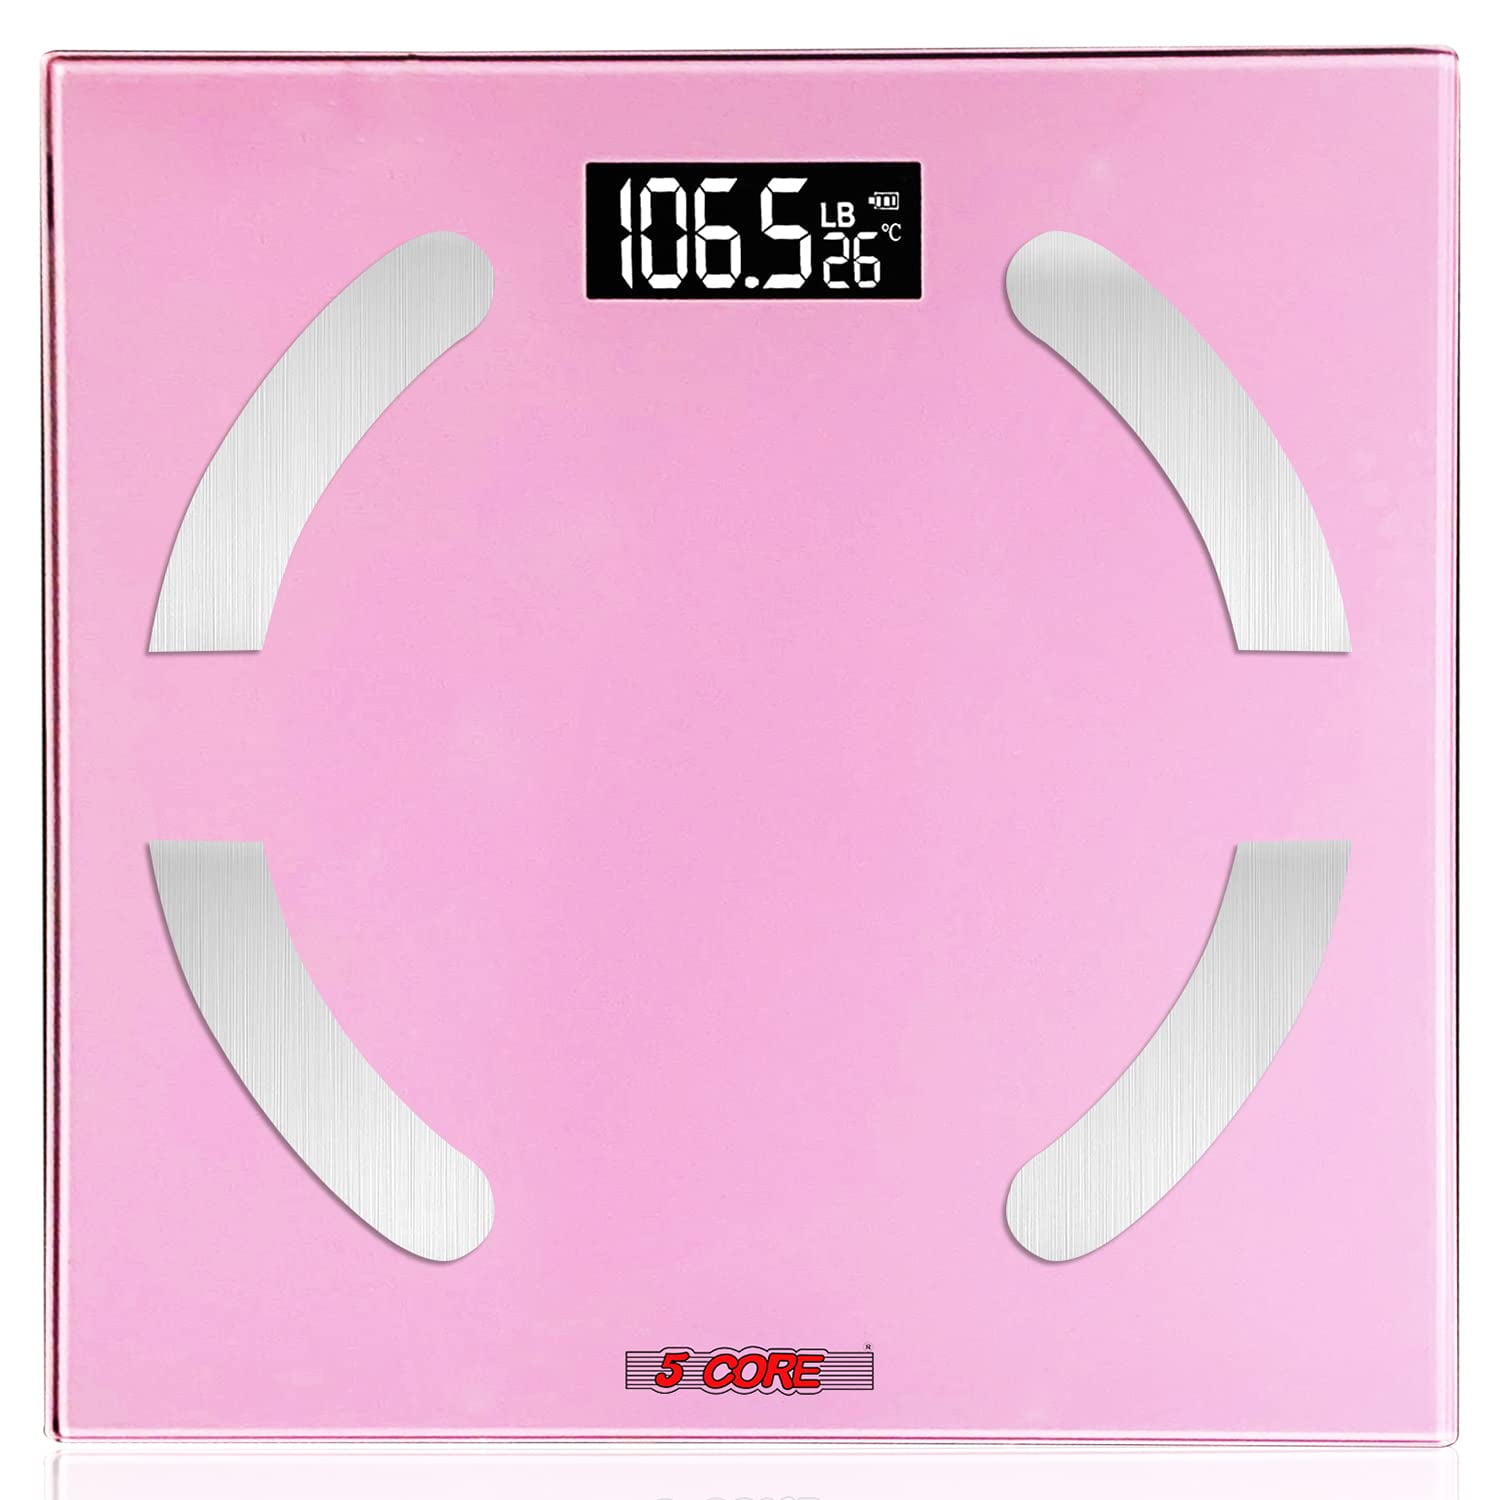 Dropship 5 Core Scales For Body Weight Fat Bathroom Scale Smart Digital  Bluetooth BMI Bascula Digital De Peso Y Grasa Corporal 400 Lbs BBS 03 B SG  to Sell Online at a